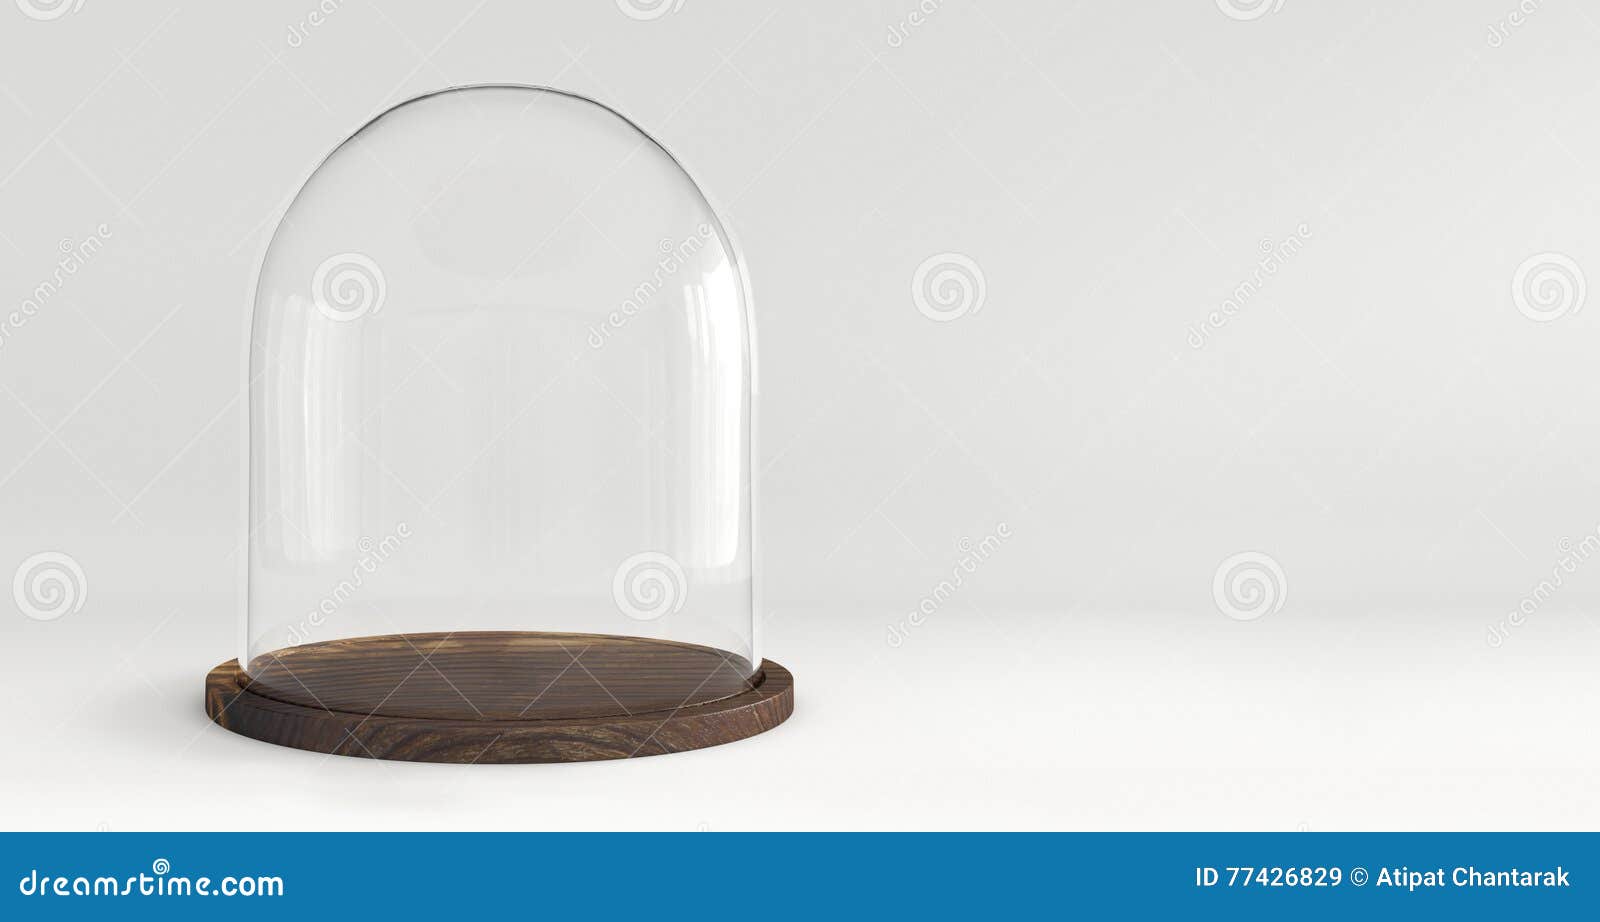 glass dome with wooden tray on white background